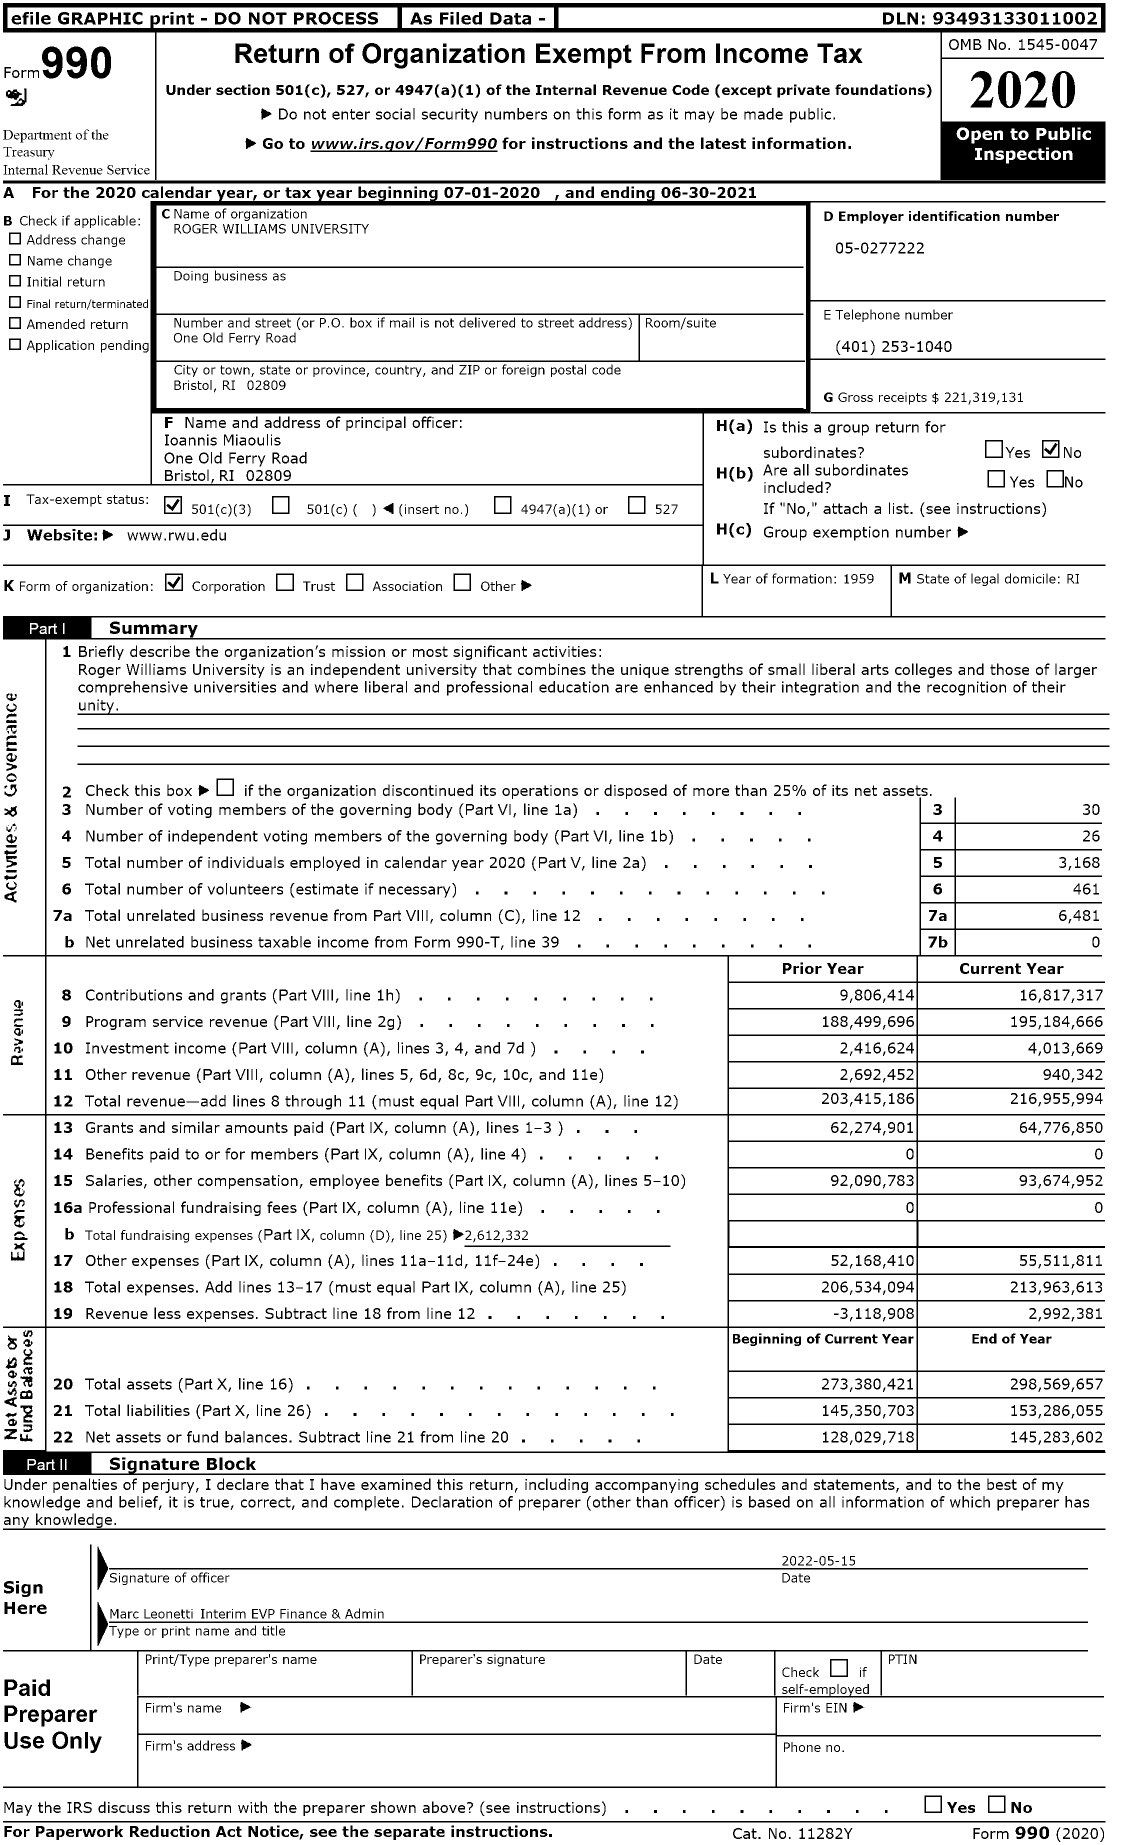 Image of first page of 2020 Form 990 for Roger Williams University (RWU)